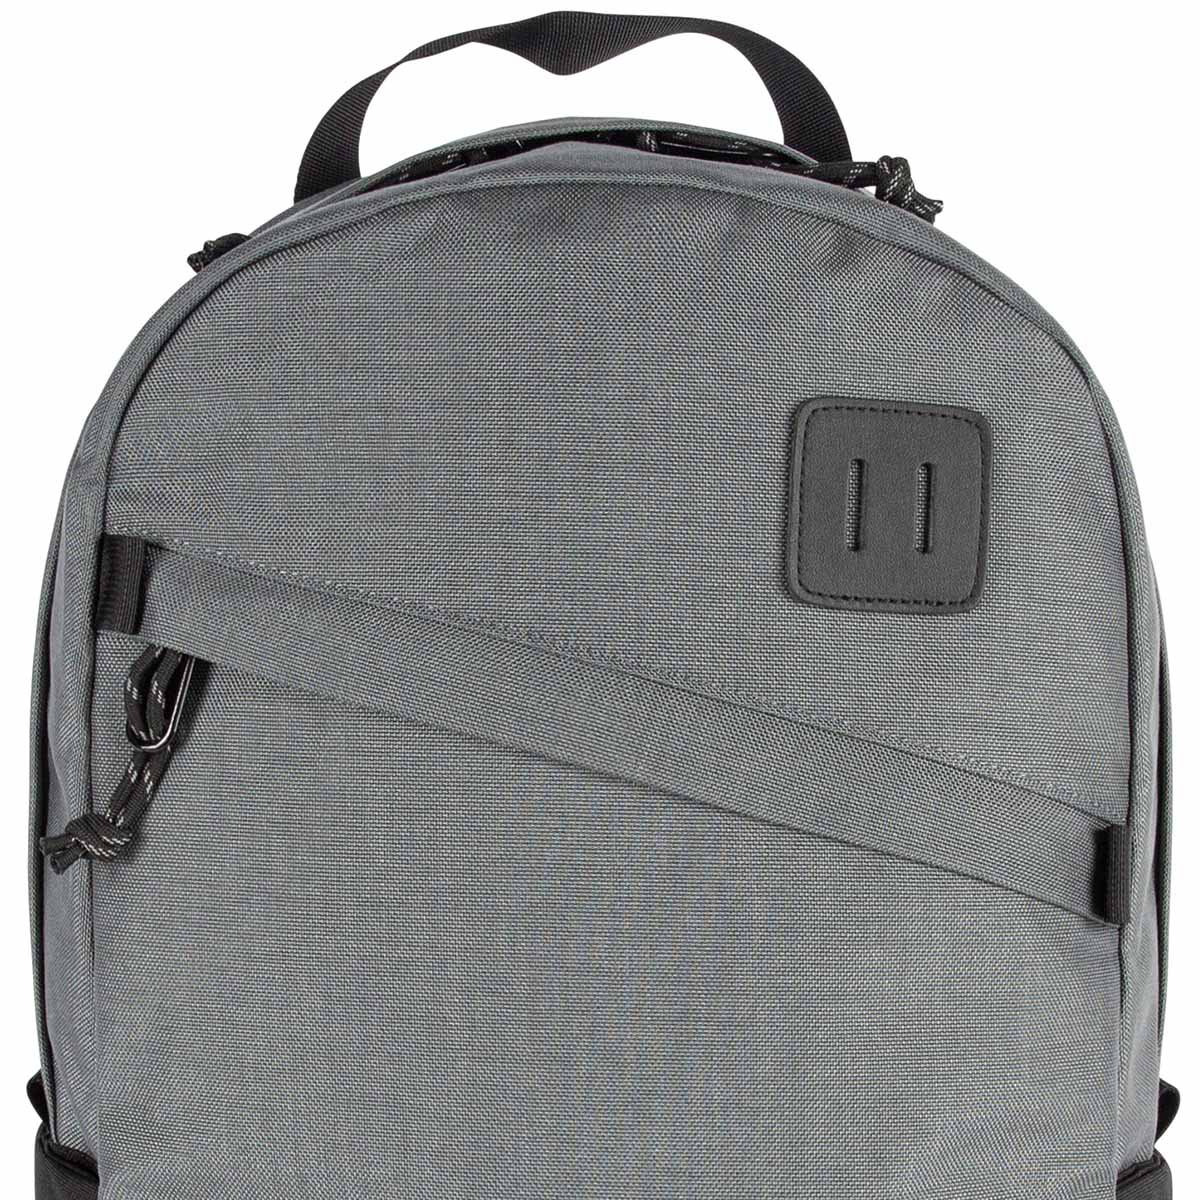 Topo Designs Daypack Classic Charcoal/Black, stylish and functional pack, ideal travel companion, schoolmate or pack mule